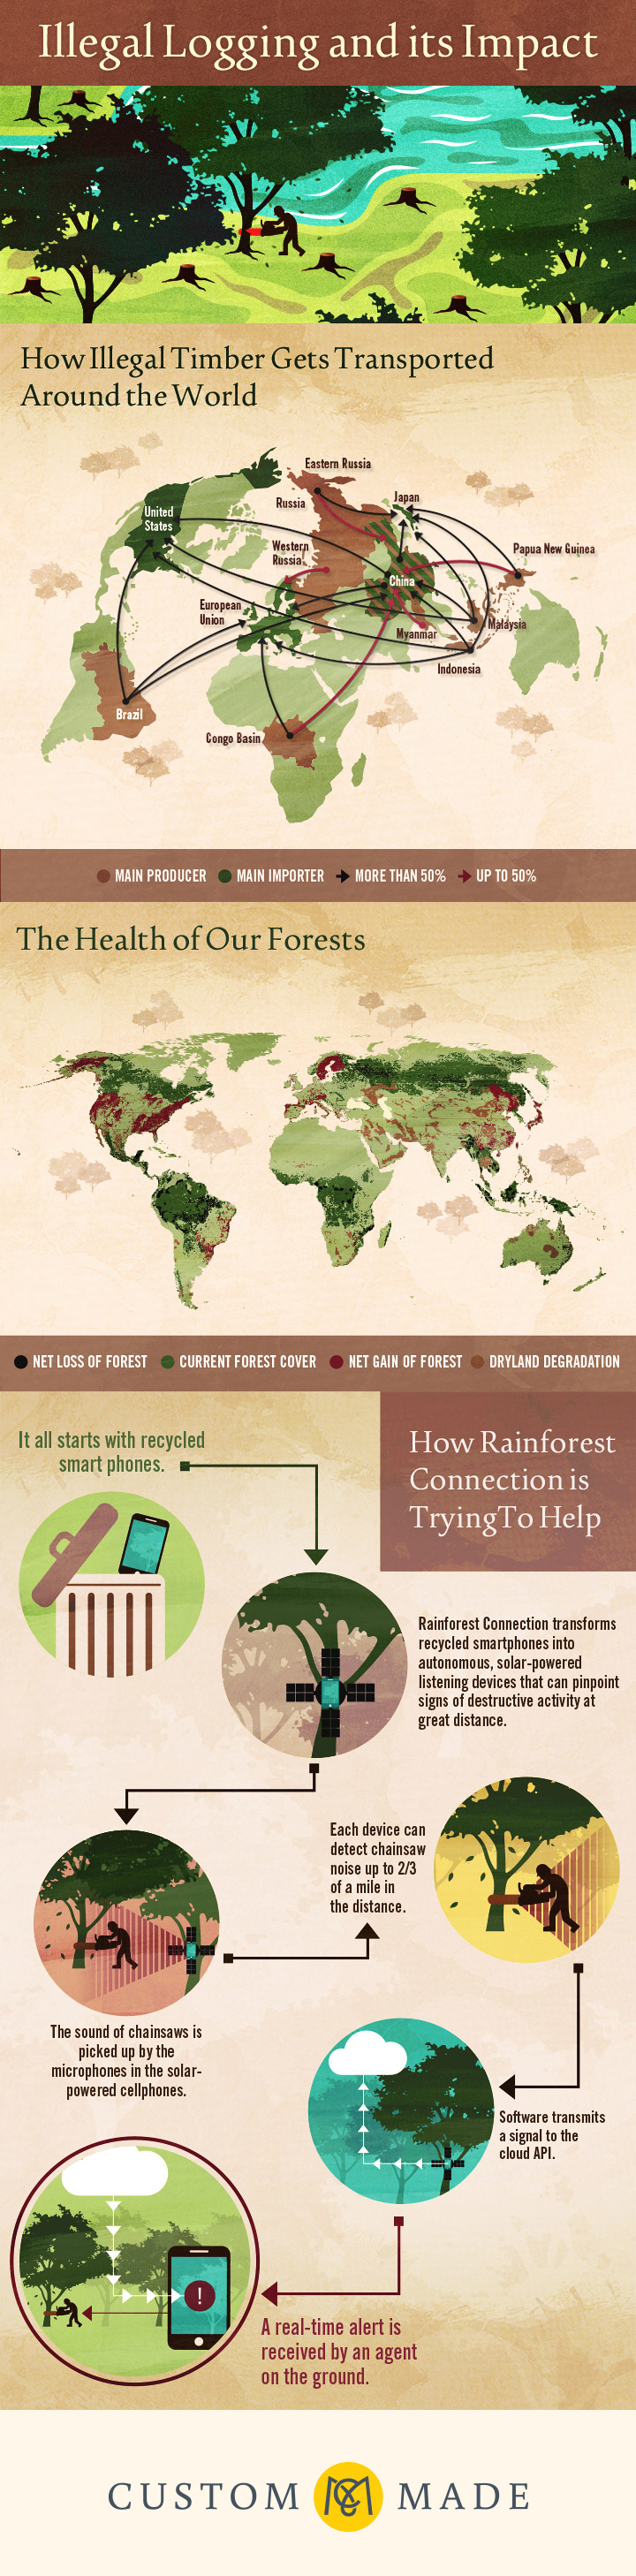 Wild Crime: Illegal Logging Industry Infographic